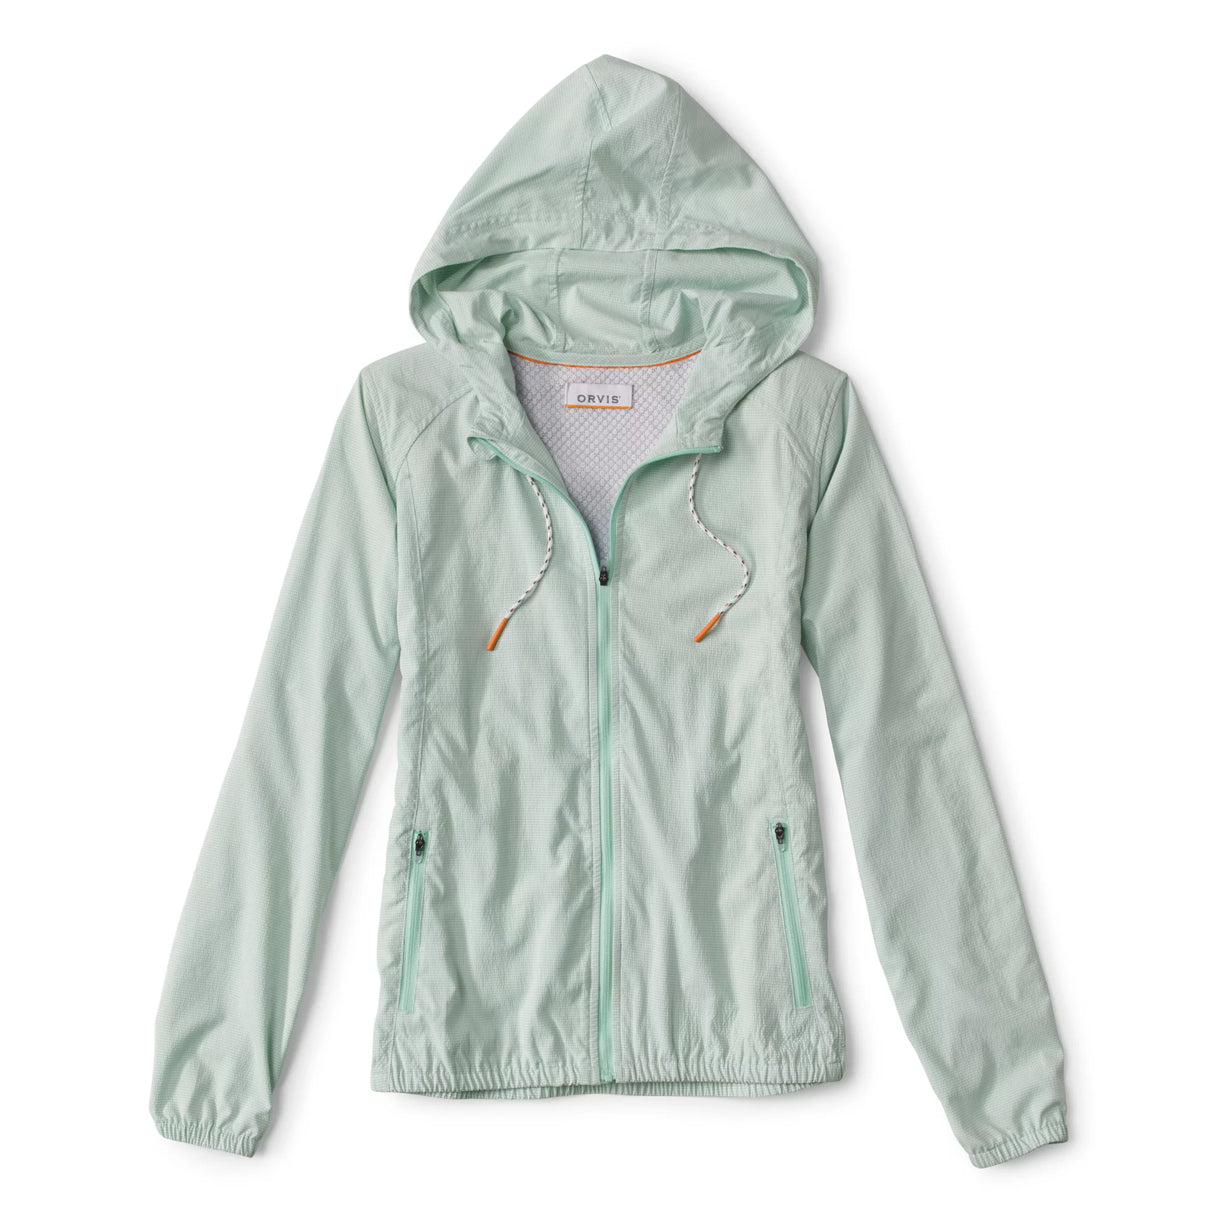 Orvis Women's Open Air Caster Hooded Zip-Up Jacket - Surf | Yellow Dog ...